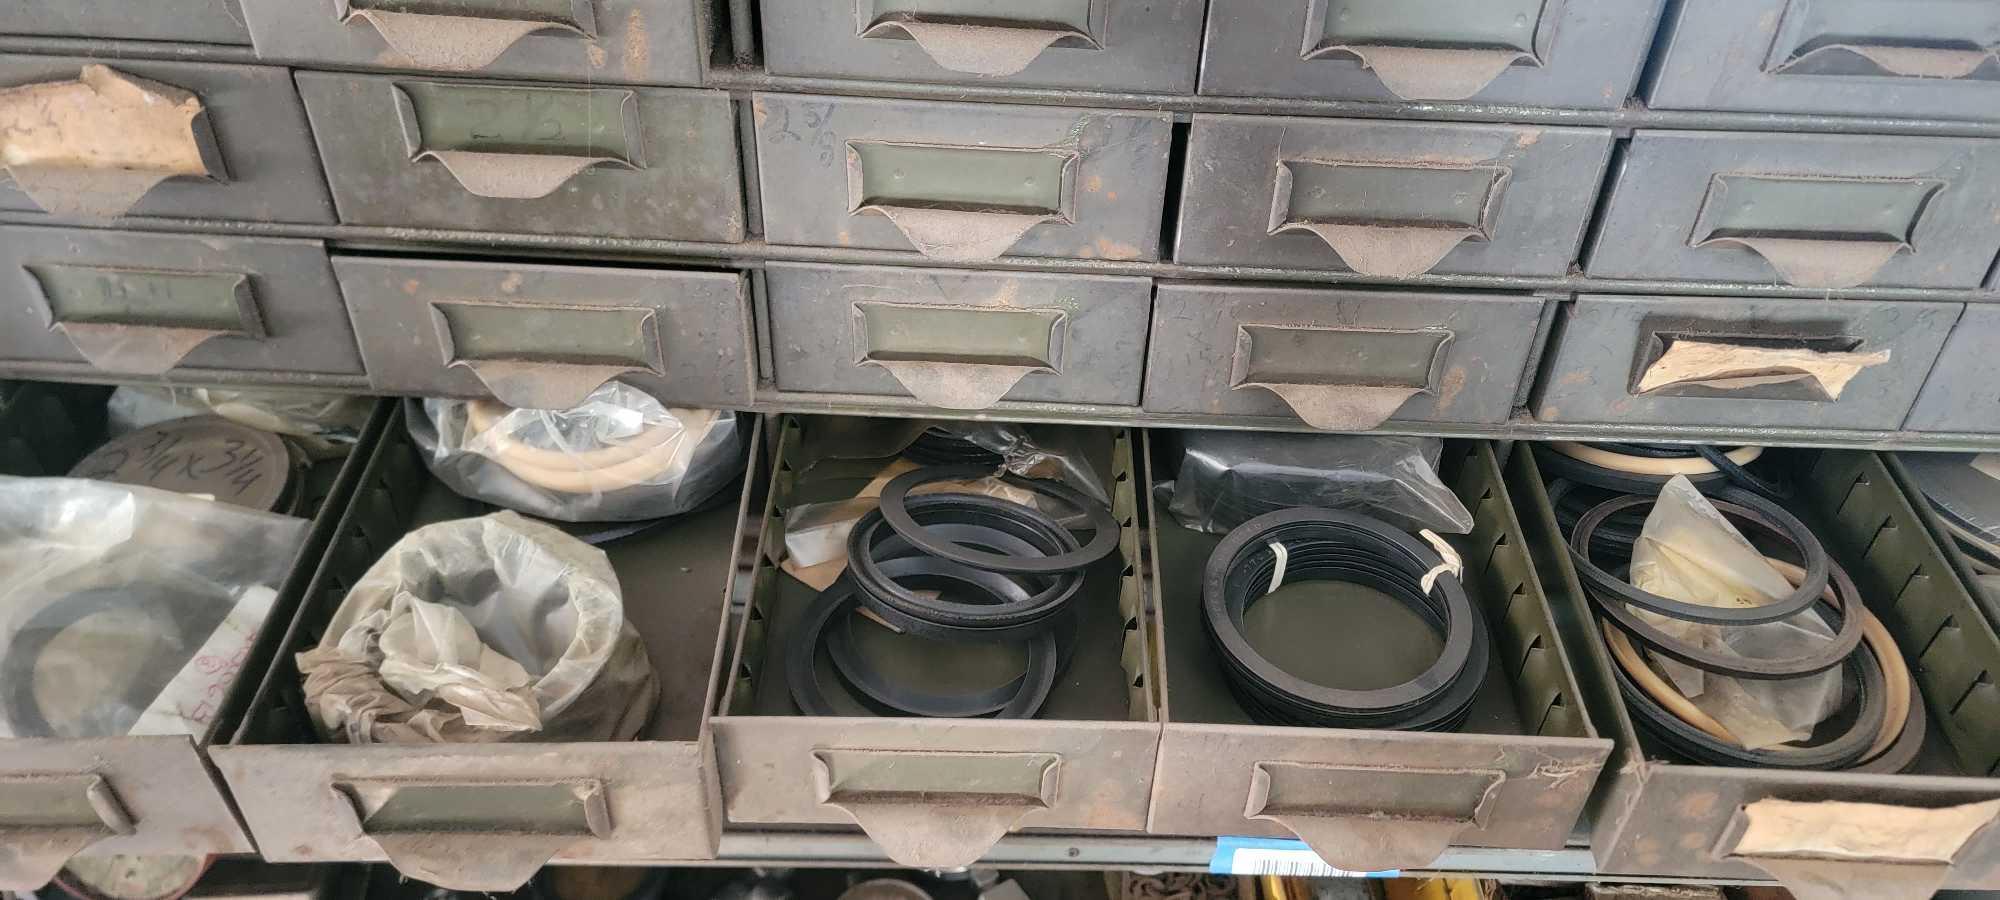 Industrial Shelving w/ Contents, Hydraulic and Welding Parts, Tools, Pressure Gauges, Materials